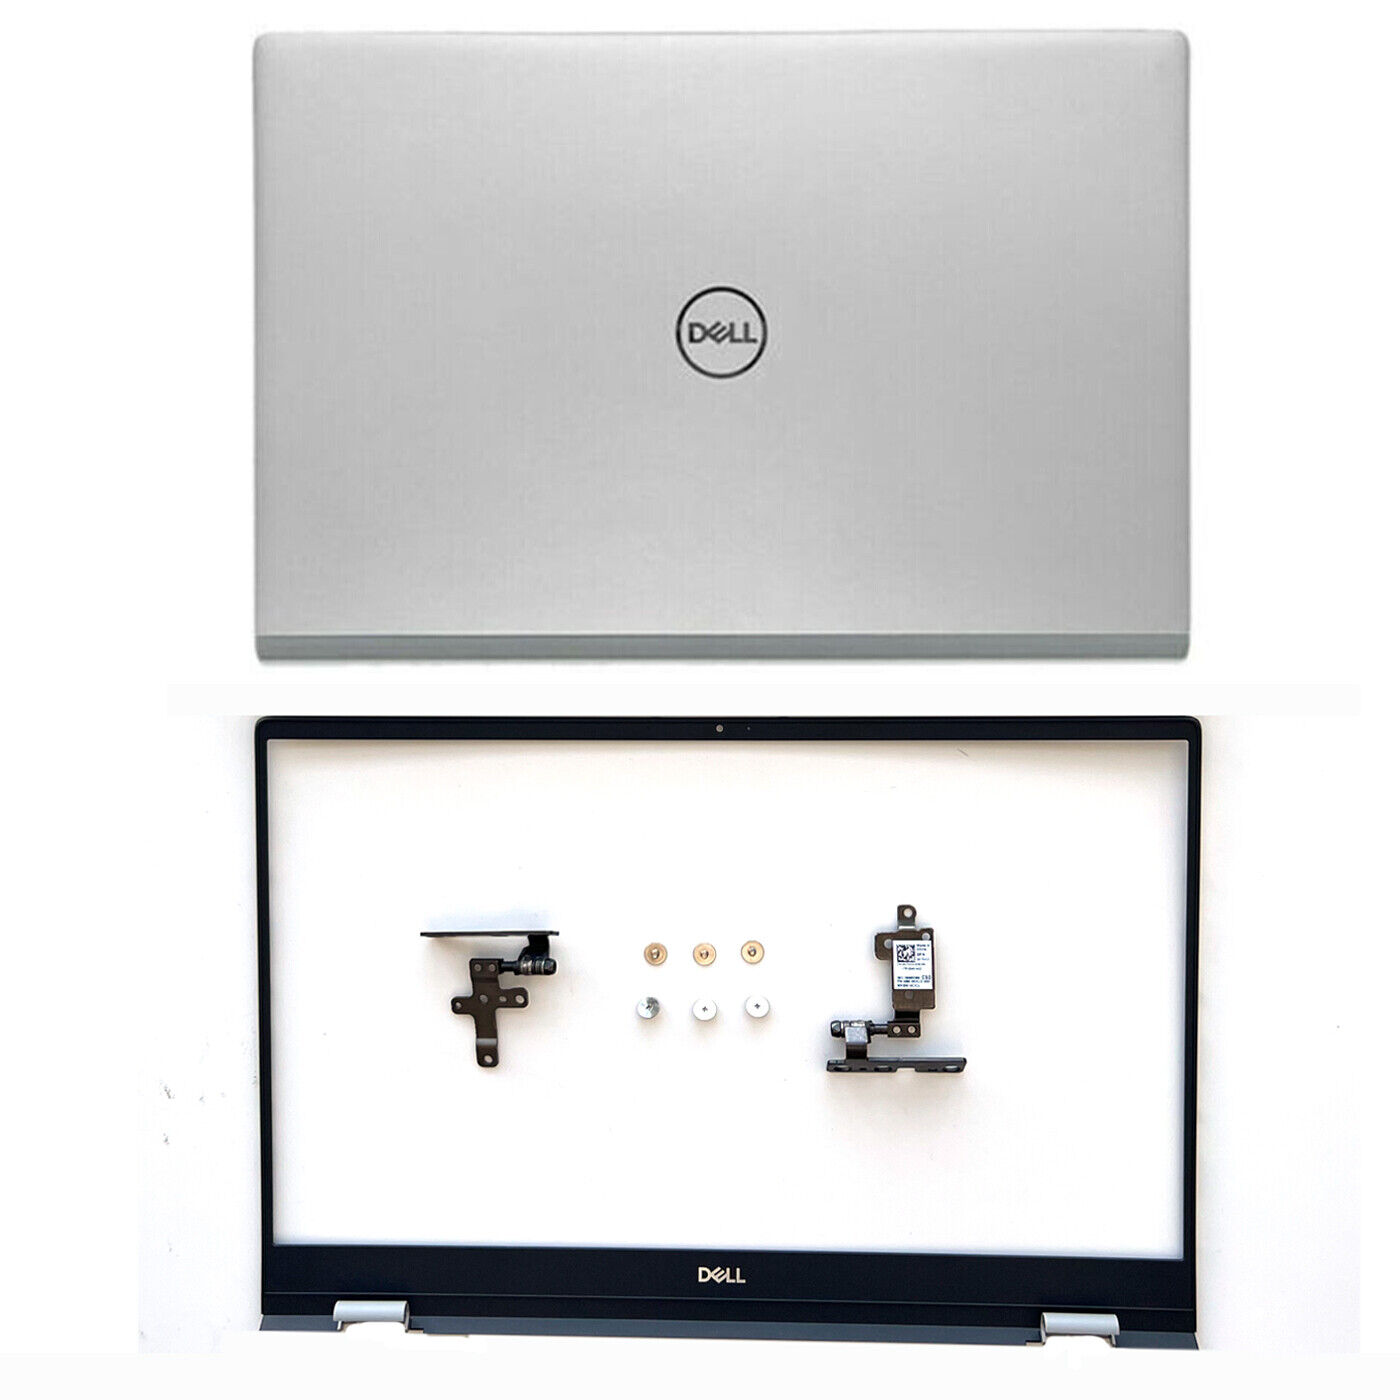 New For Dell Inspiron 14 5401 5402 5405 Lcd Back Cover + Bezel + Hinges 0WK1KG